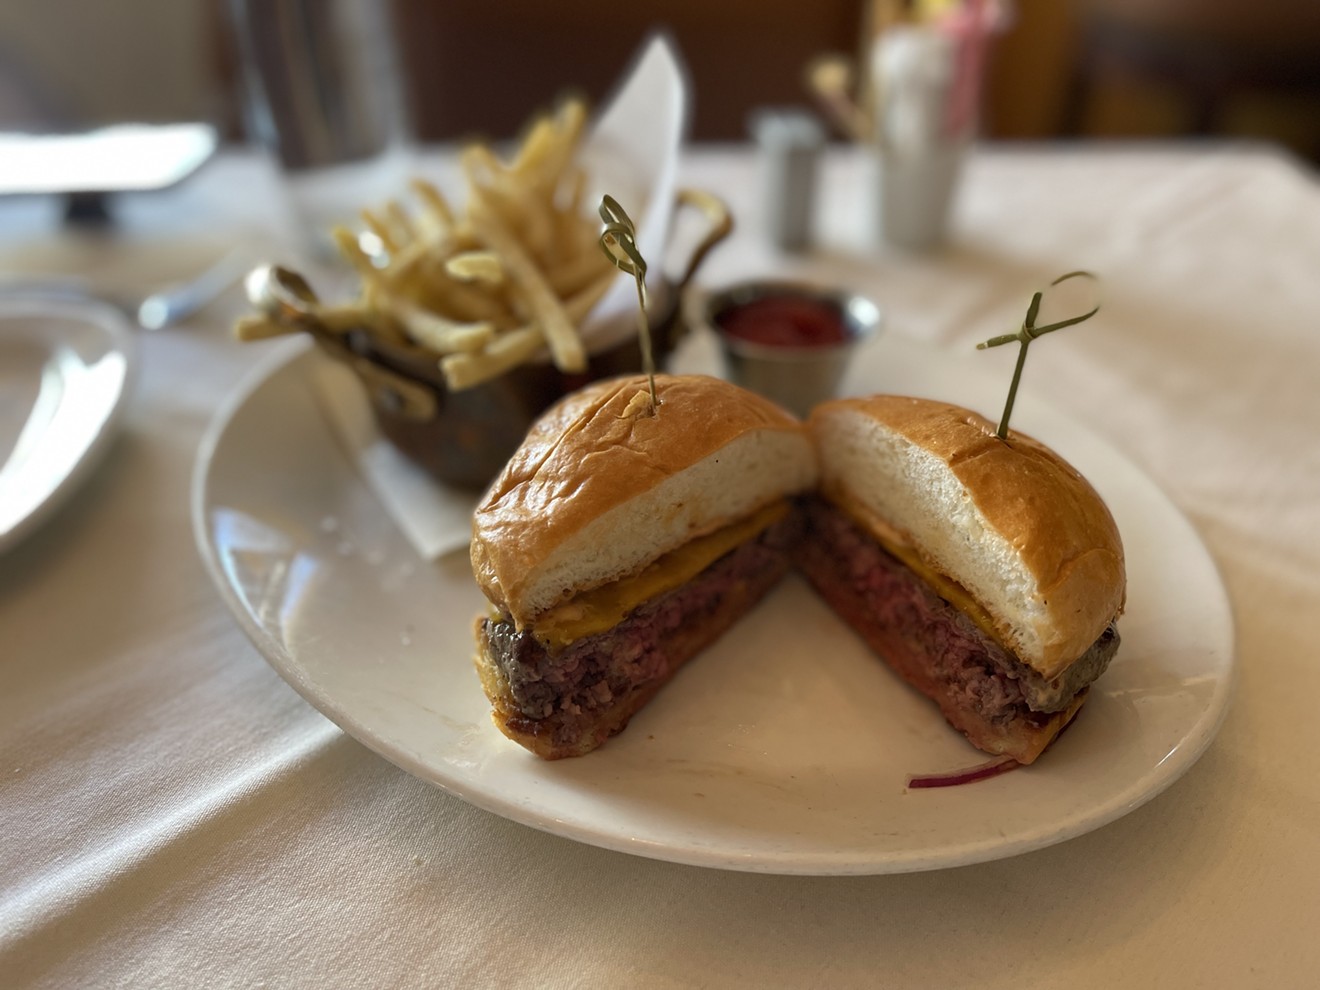 We paid a recent visit to Bistro 31 and were surprised by the humble burger.